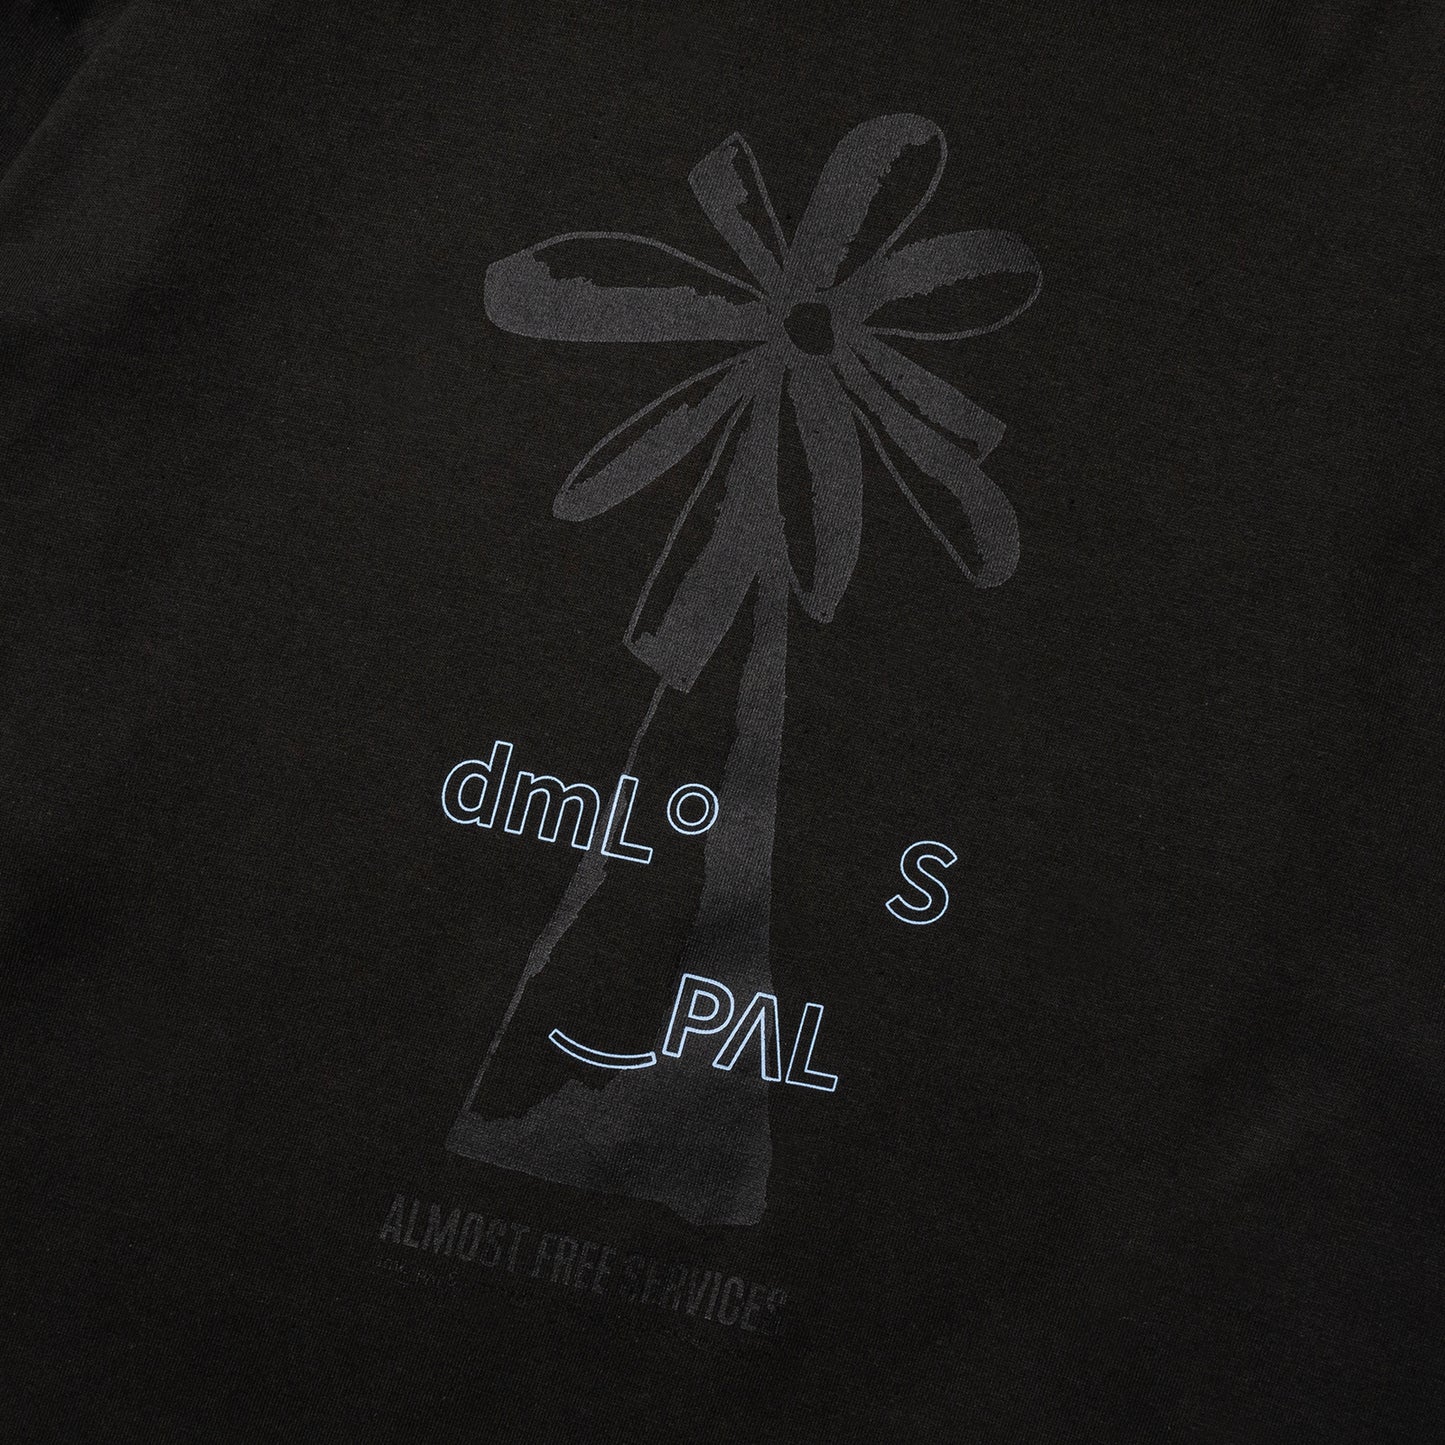 ALMOST FREE SERVICES × DML × OPALS “THE INTERIOR” L/S TEE